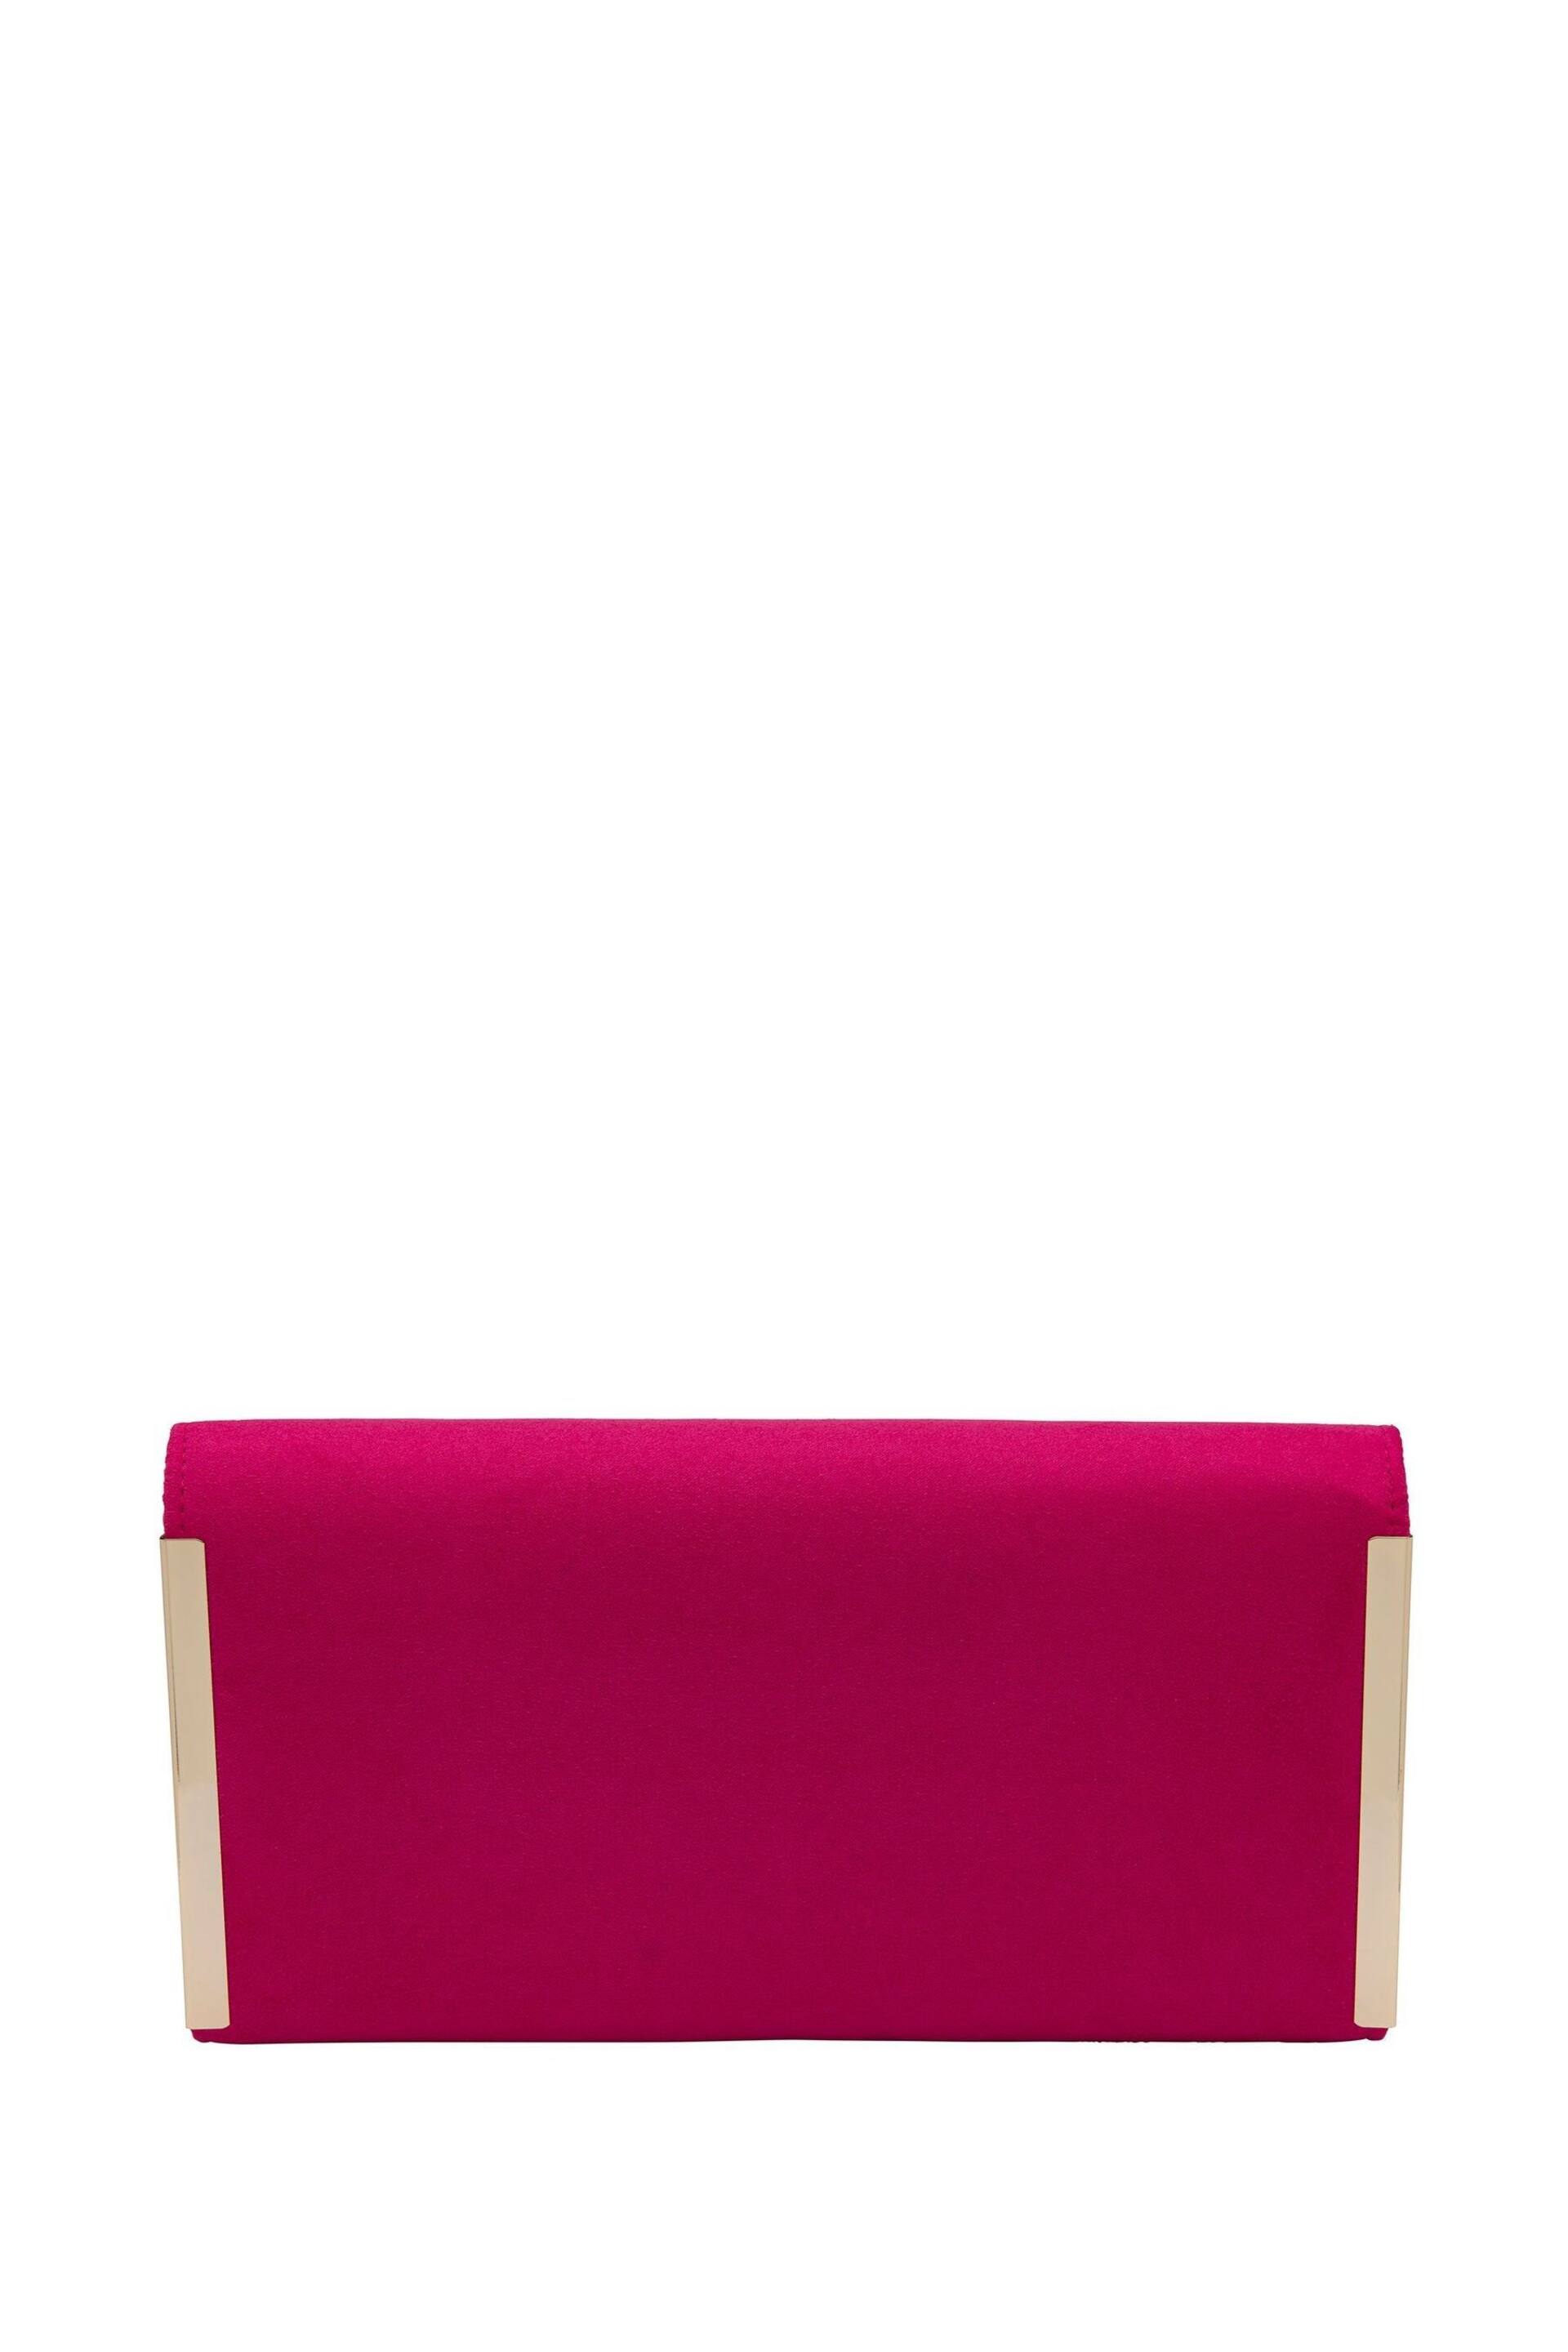 Lotus Pink Clutch Bag With Chain - Image 2 of 4